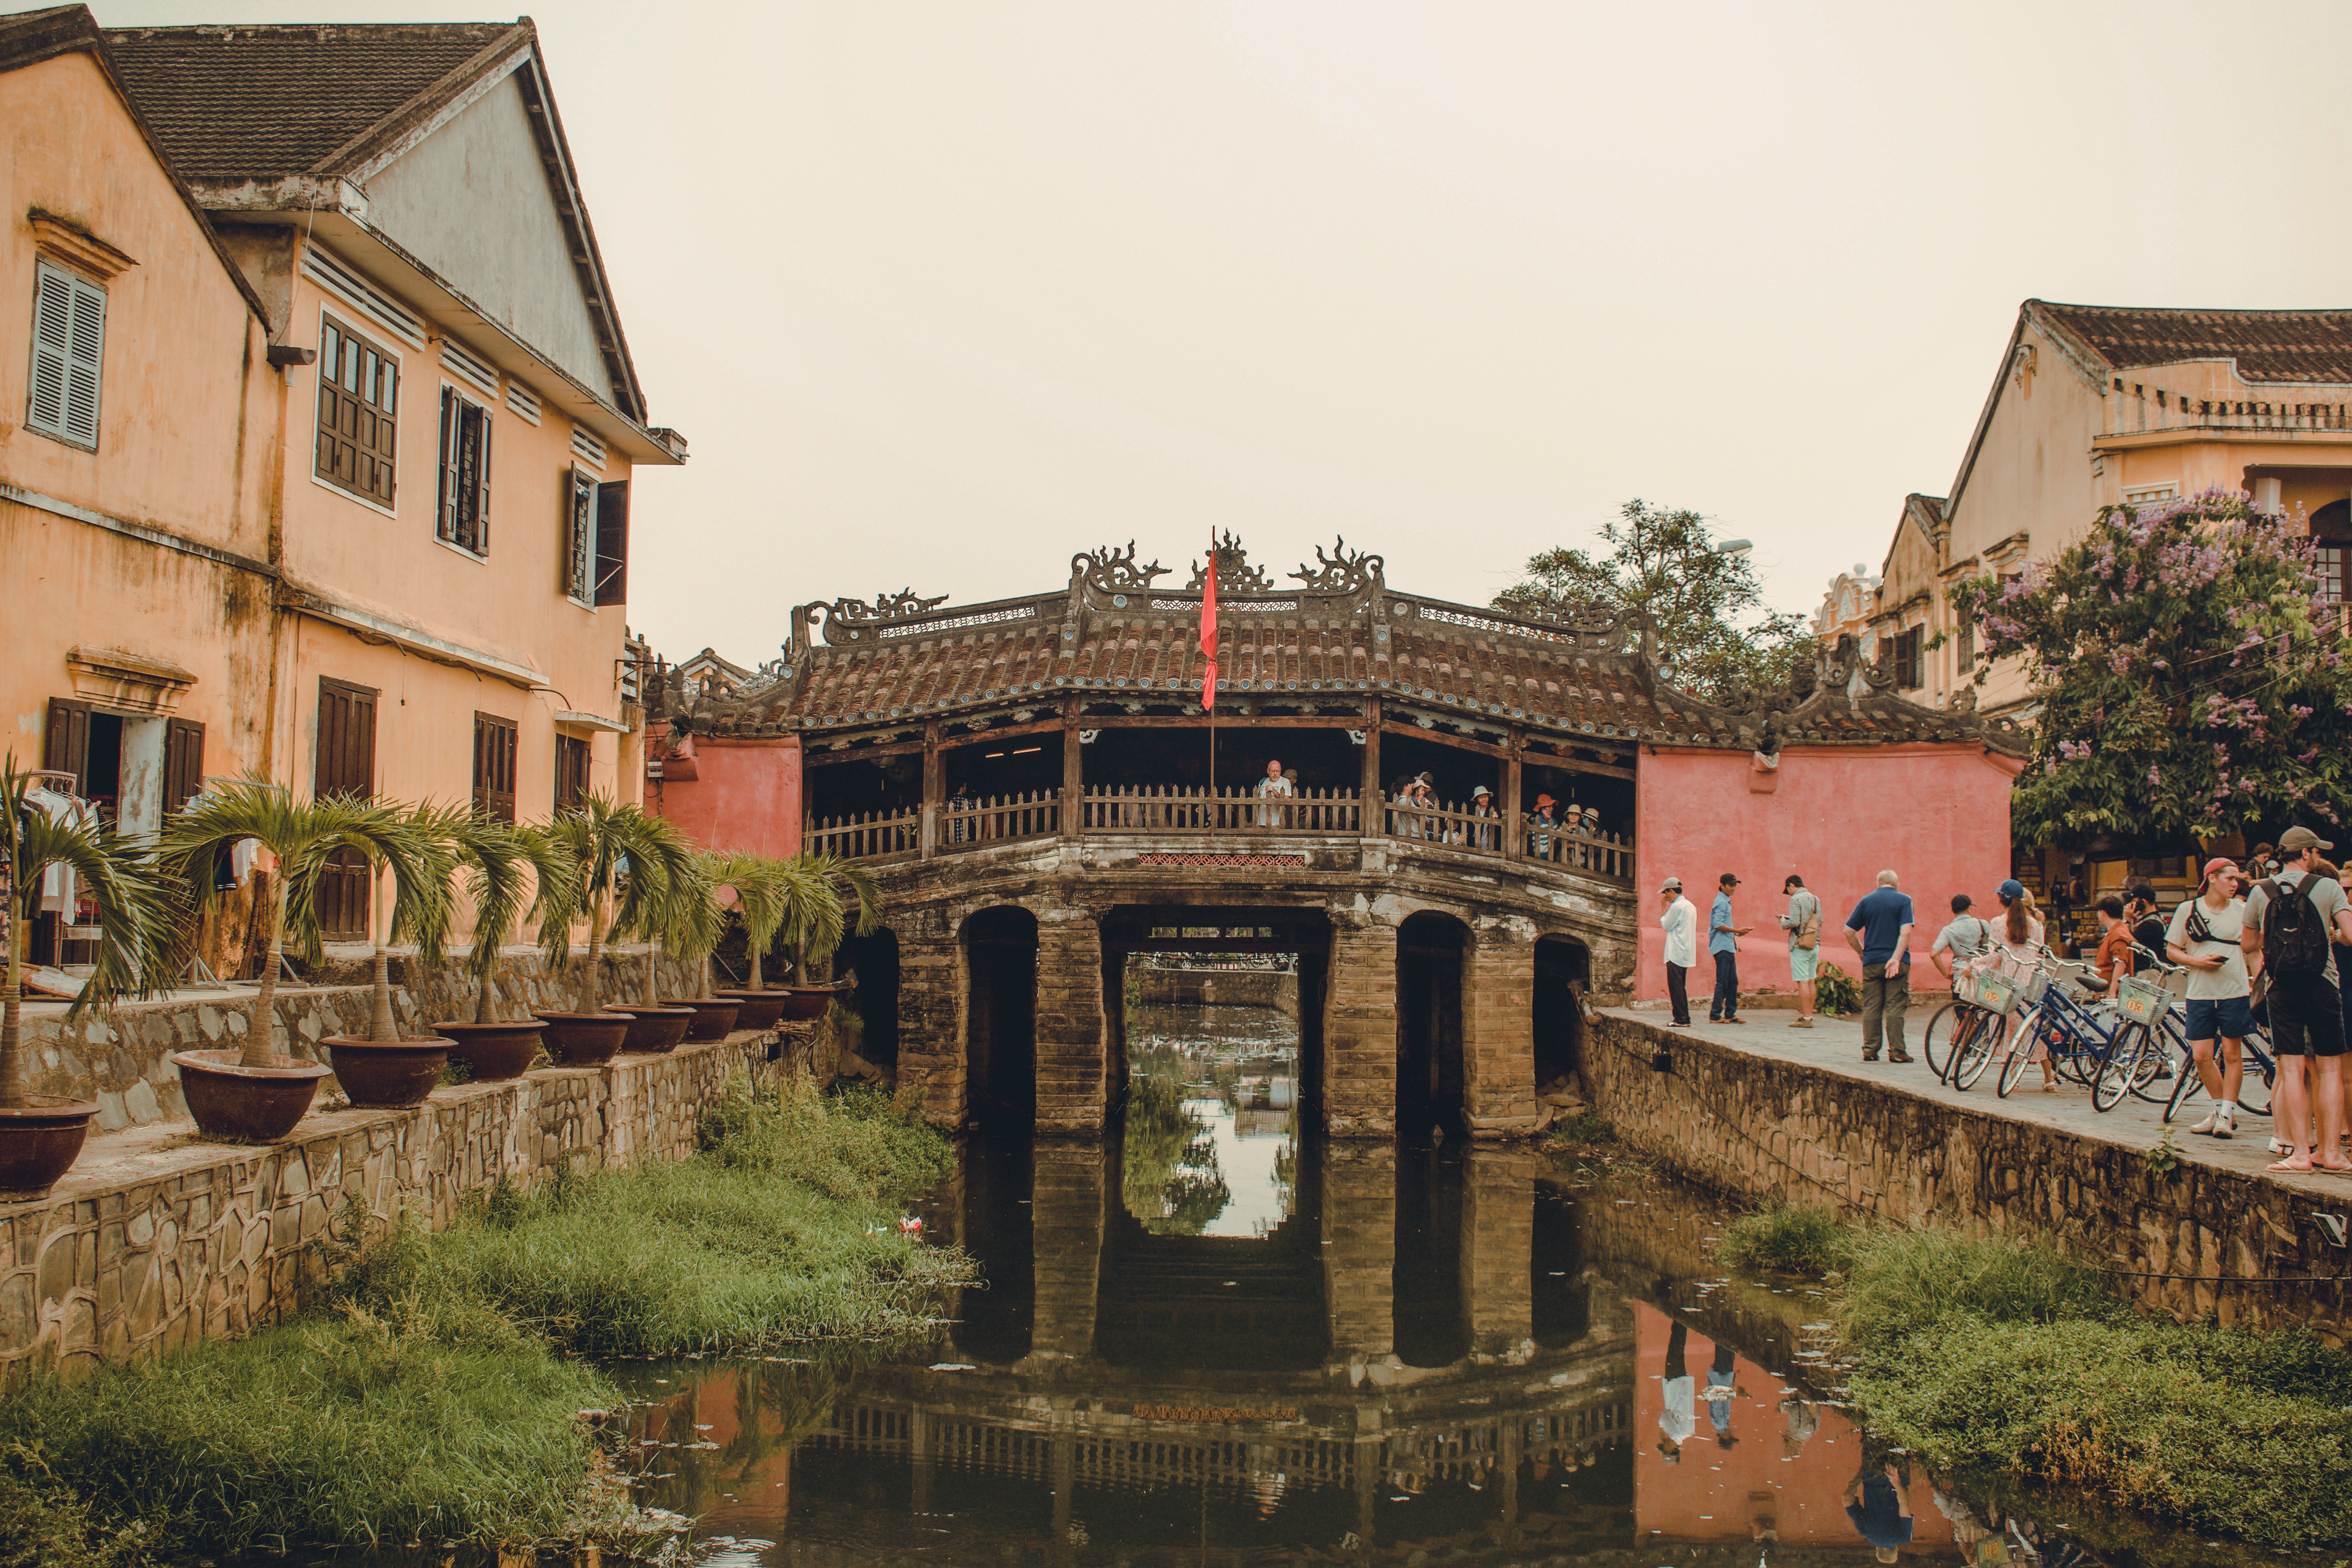 Photo from one month living in Hoi An, Vietnam